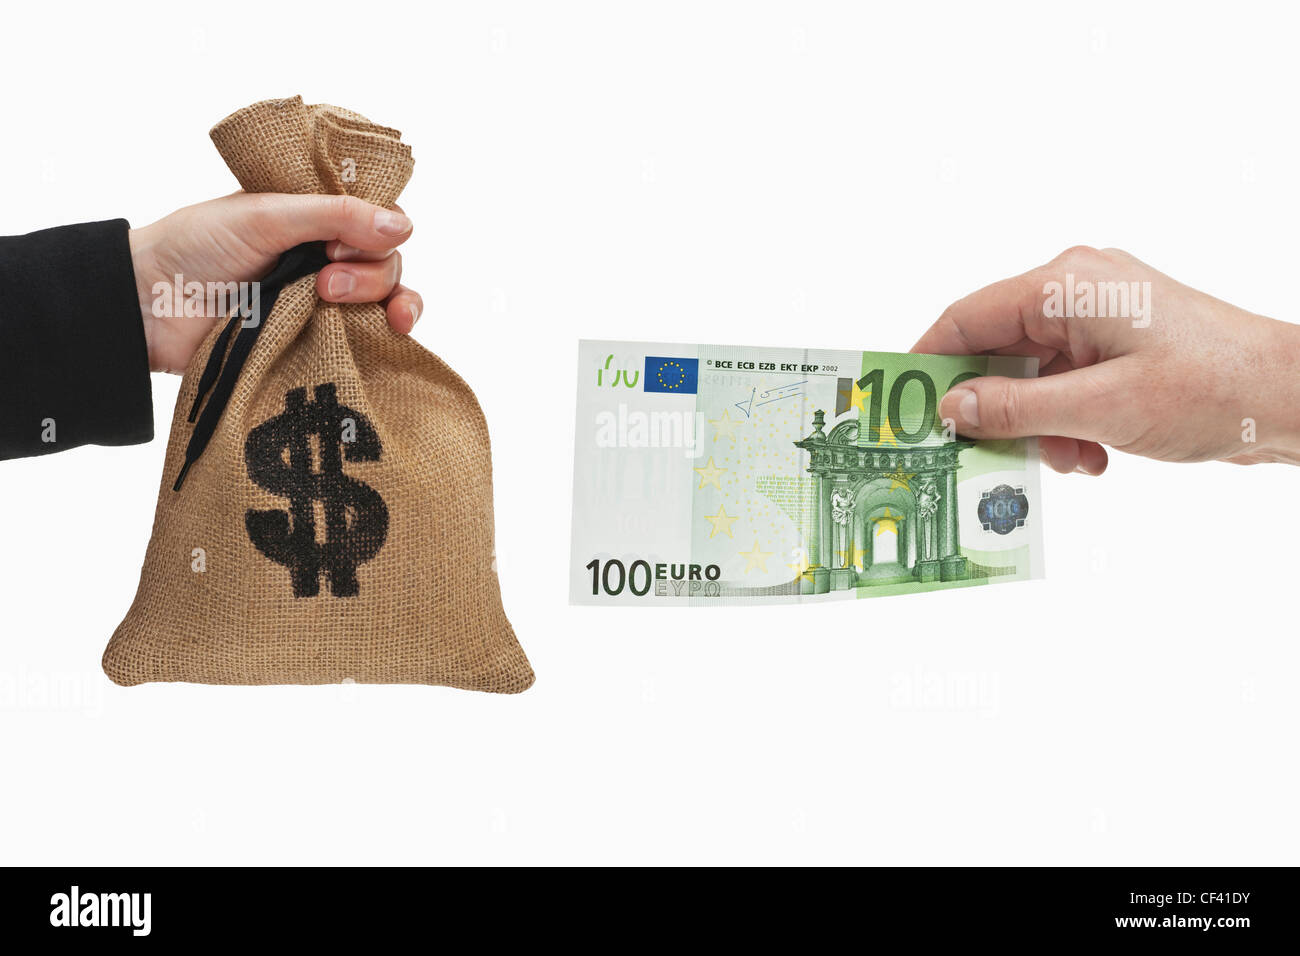 A 100 Euro bill is held in the hand. At the other side a money bag with a U.S. Dollar currency sign is held in the hand. Stock Photo